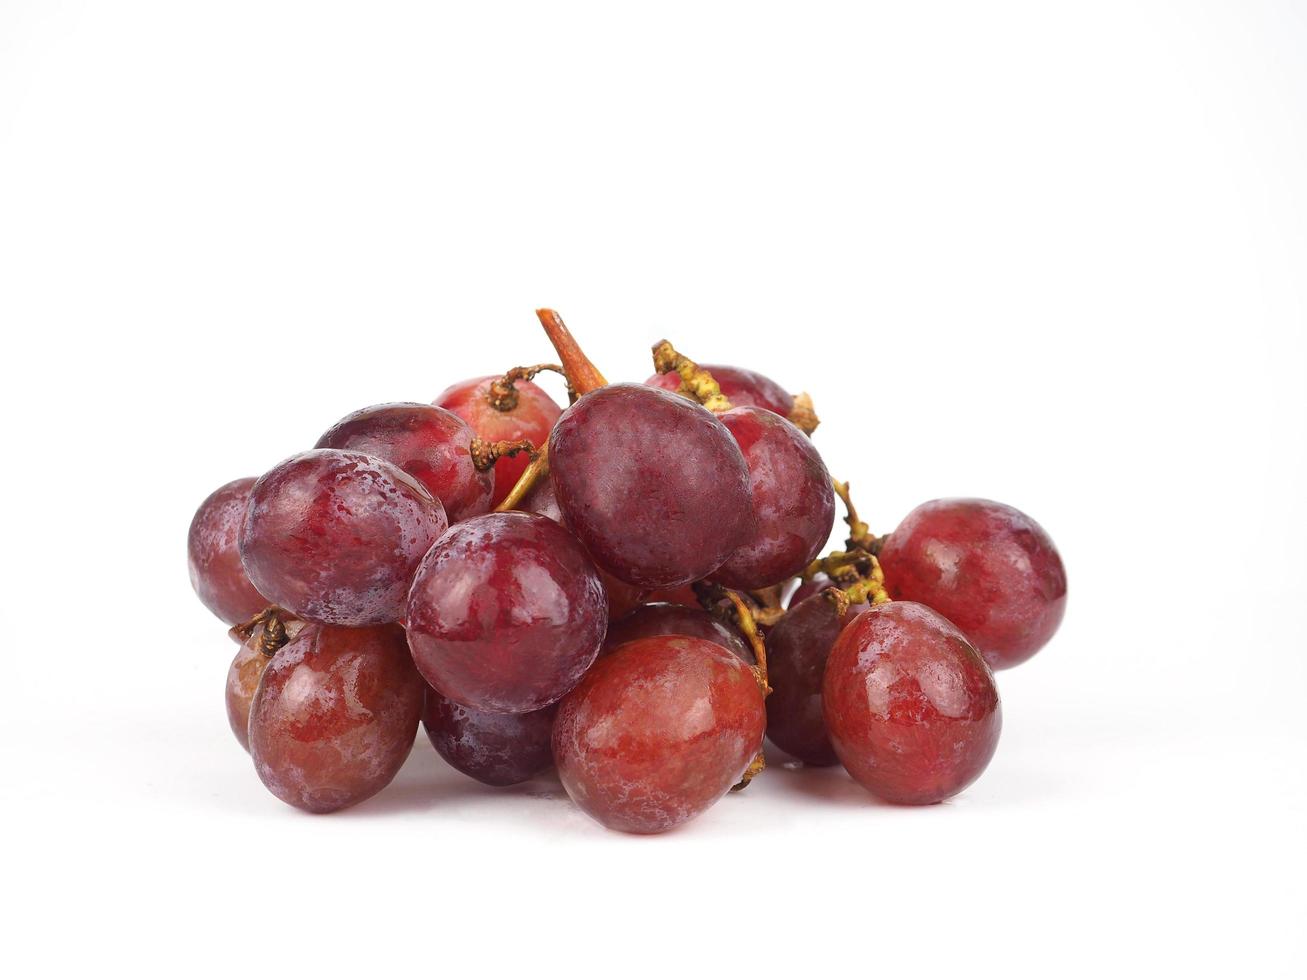 Red grapes ripe with branch on white isolated background photo